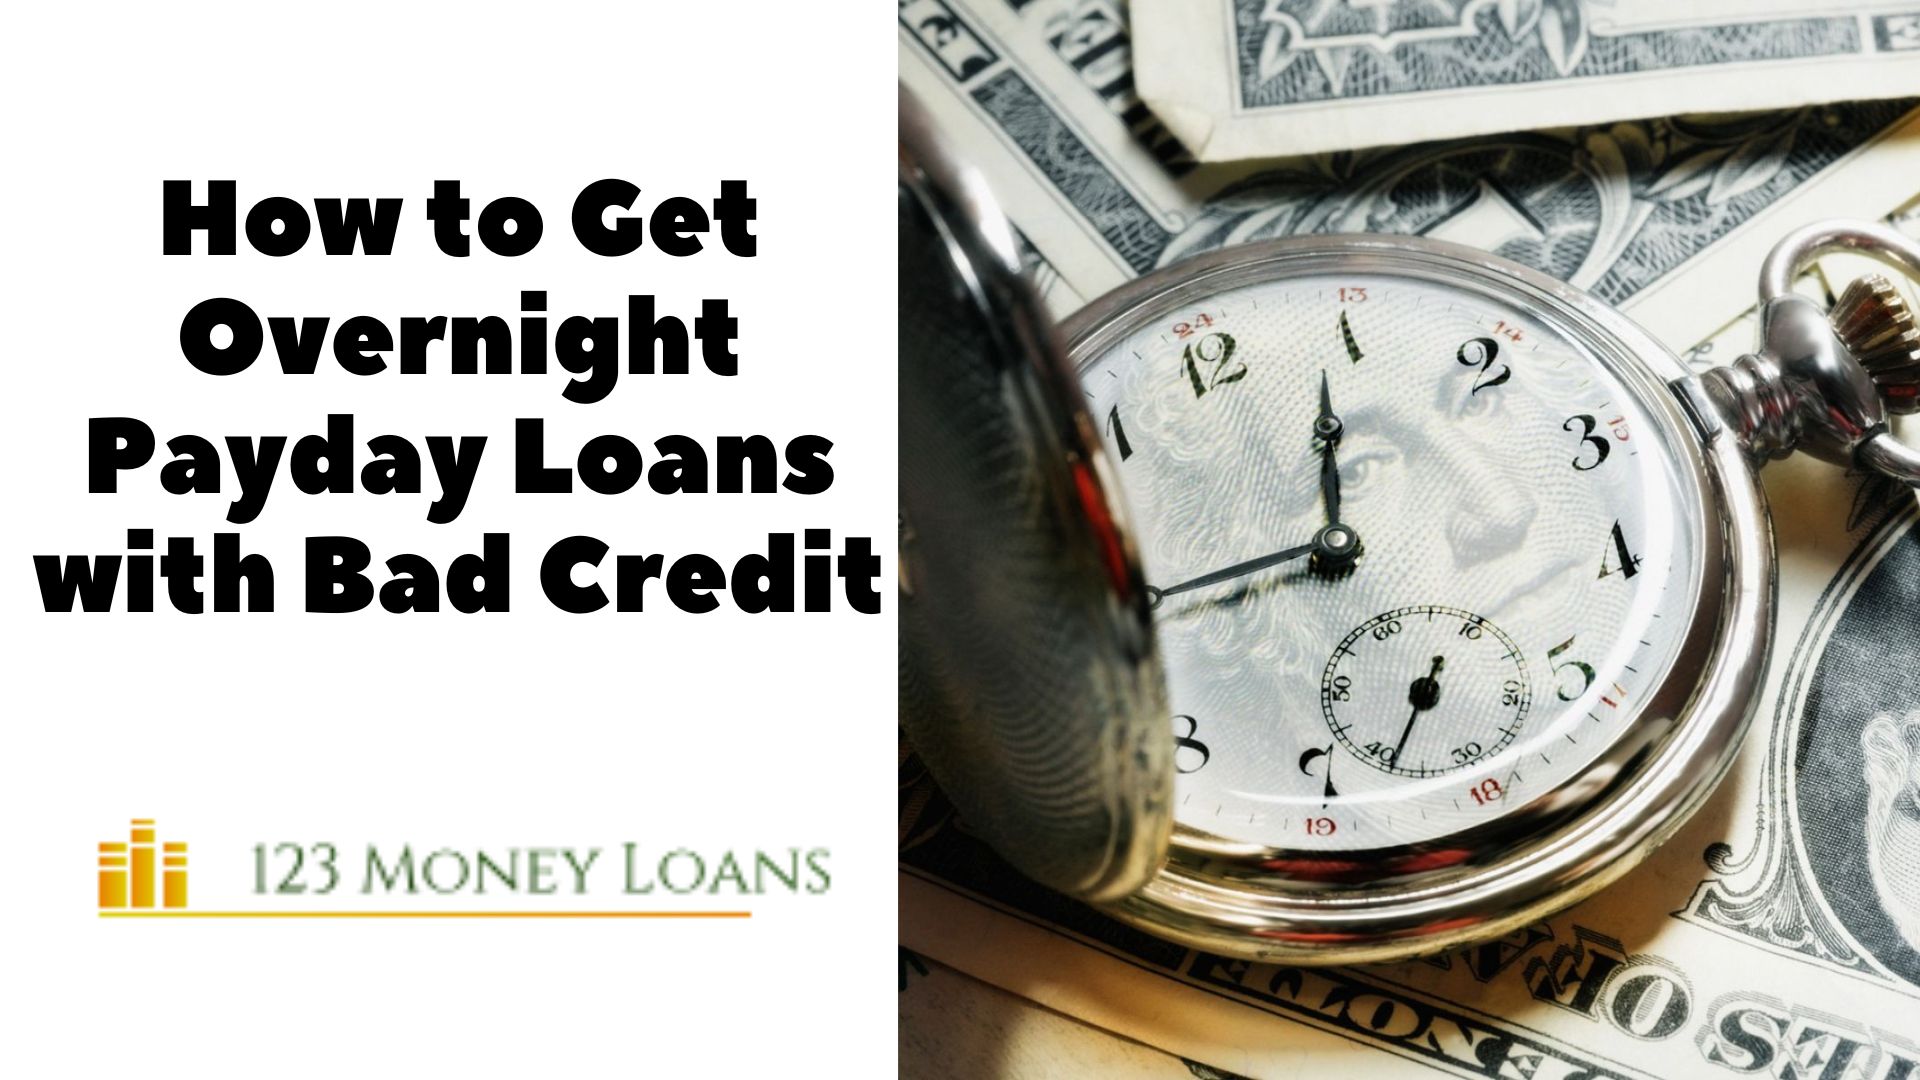 How to Get Overnight Payday Loans with Bad Credit